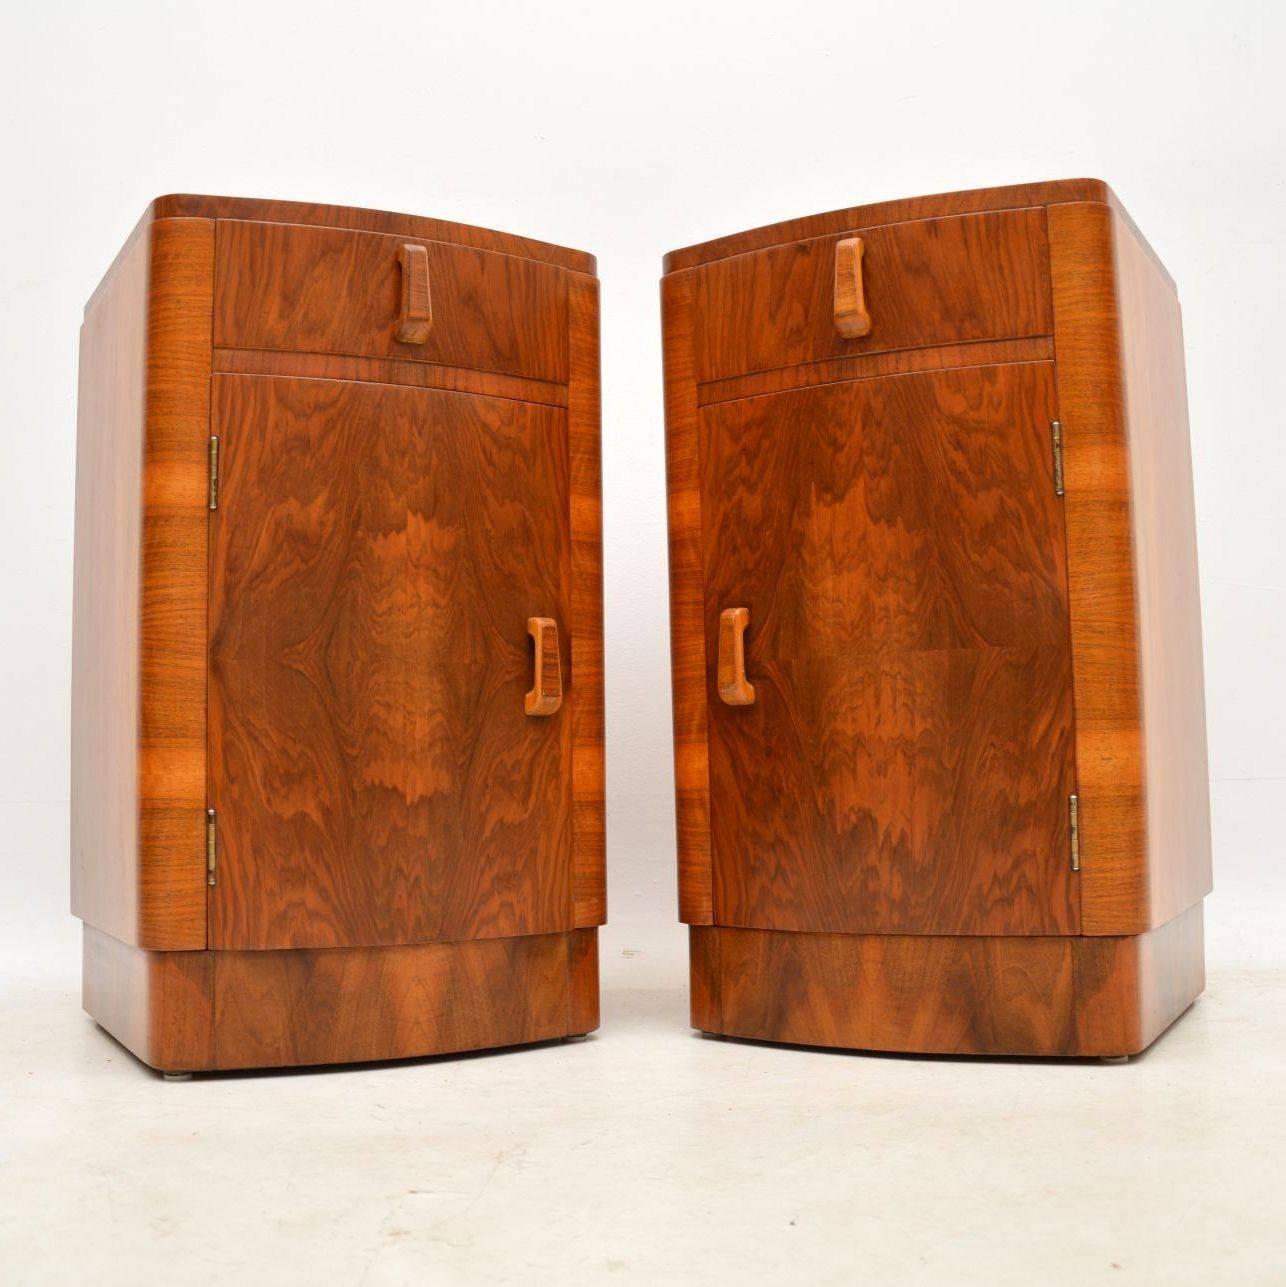 A beautiful pair of original Art Deco bedside cabinets, exquisitely made in walnut, these date from the 1920s-1930s. They are really high quality, and we’ve had them stripped and re-polished to a very high standard, the condition is superb